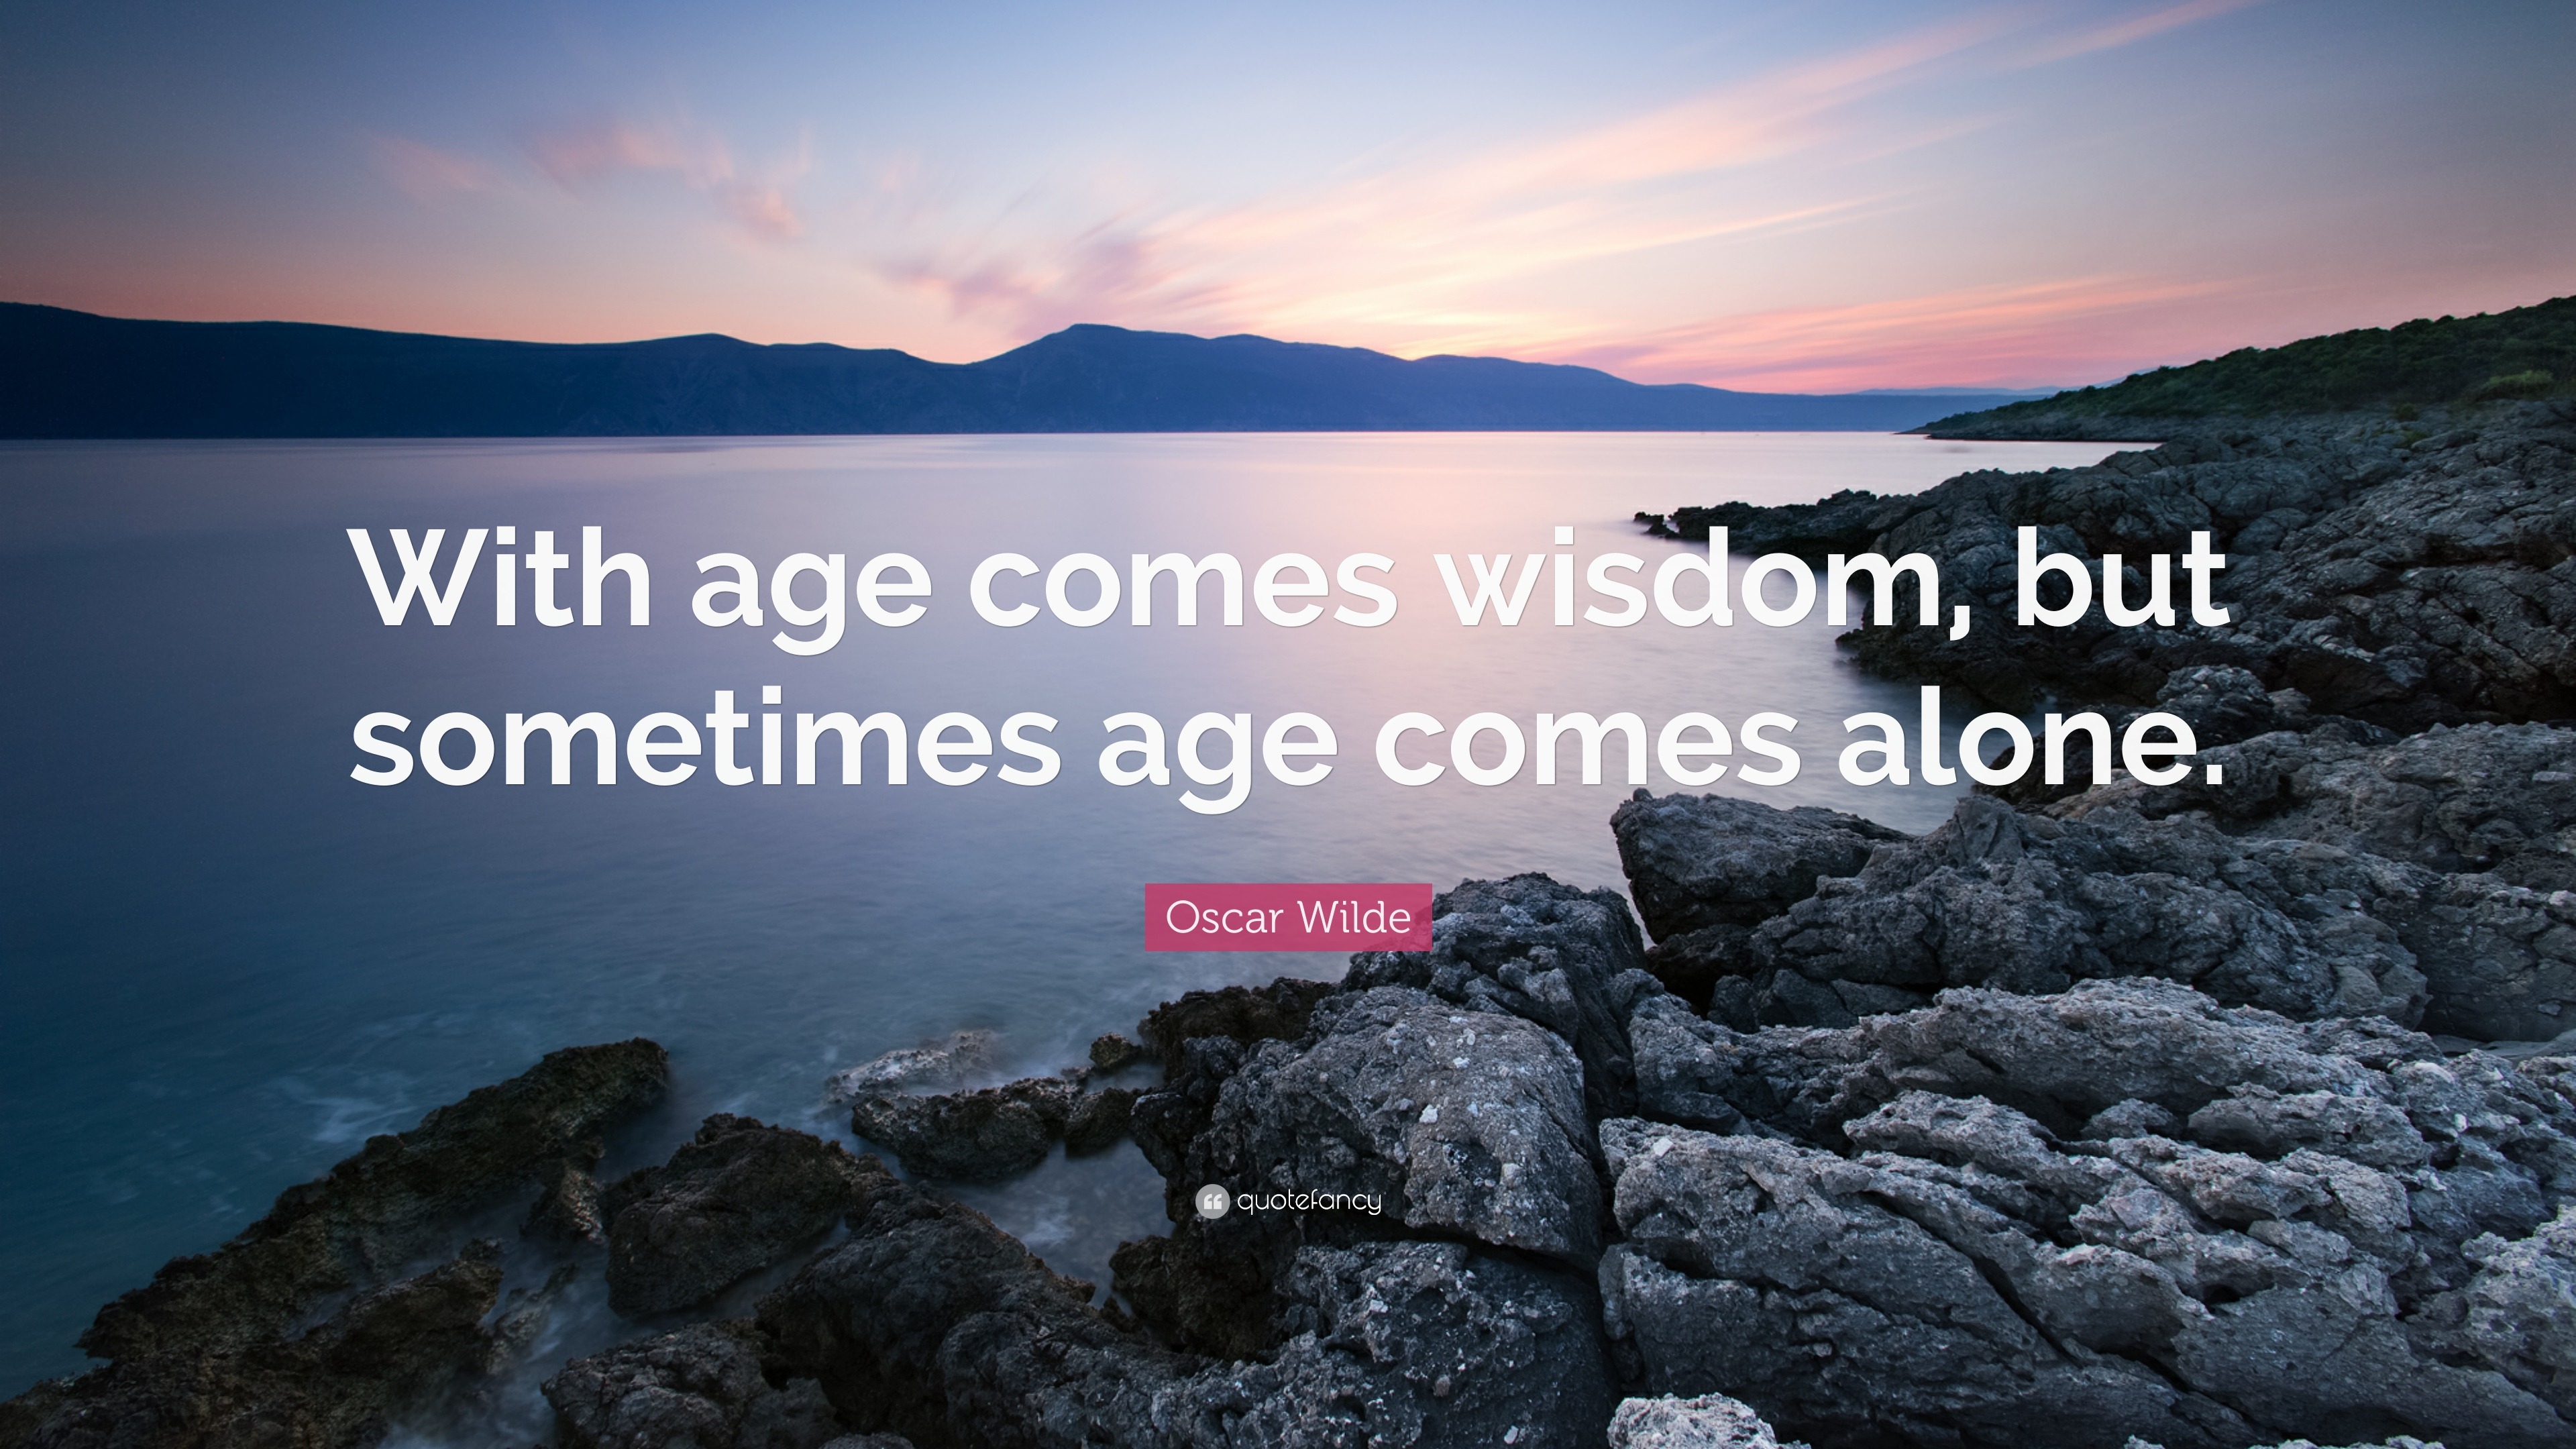 jacki long: Day 3152: With age comes wisdom.